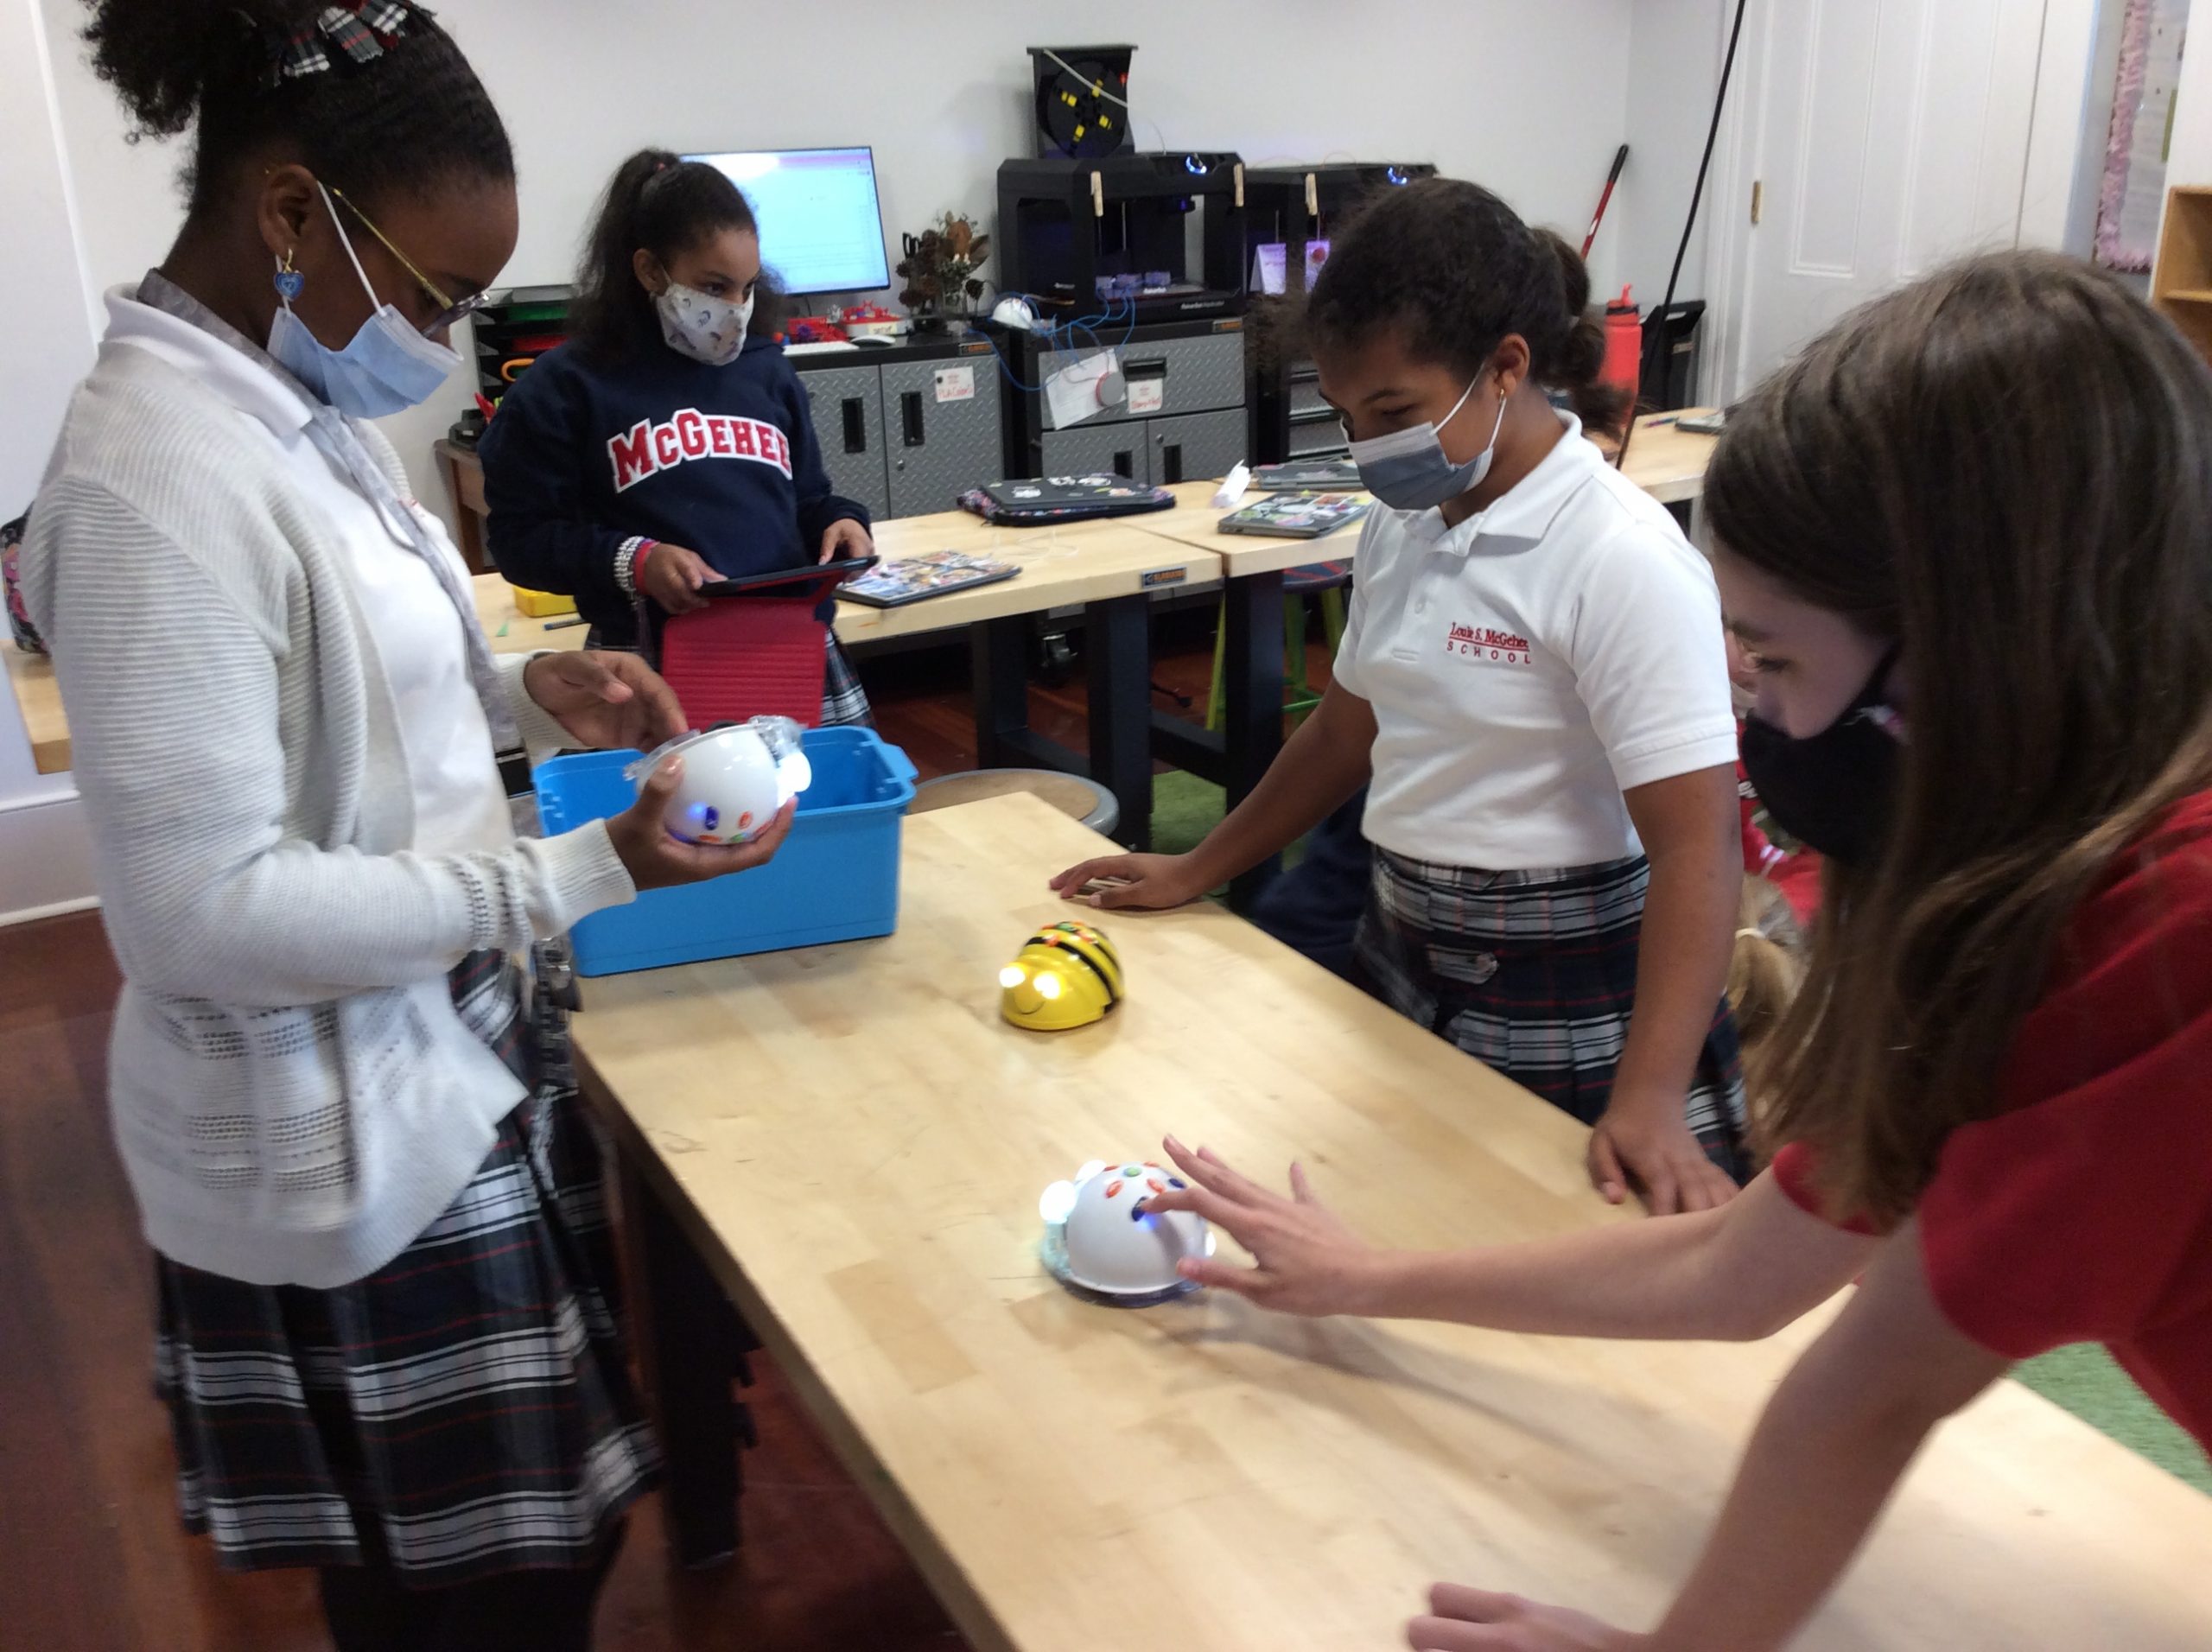 STEM, STEAM and Social-Emotional Development at The Louise S. McGehee School